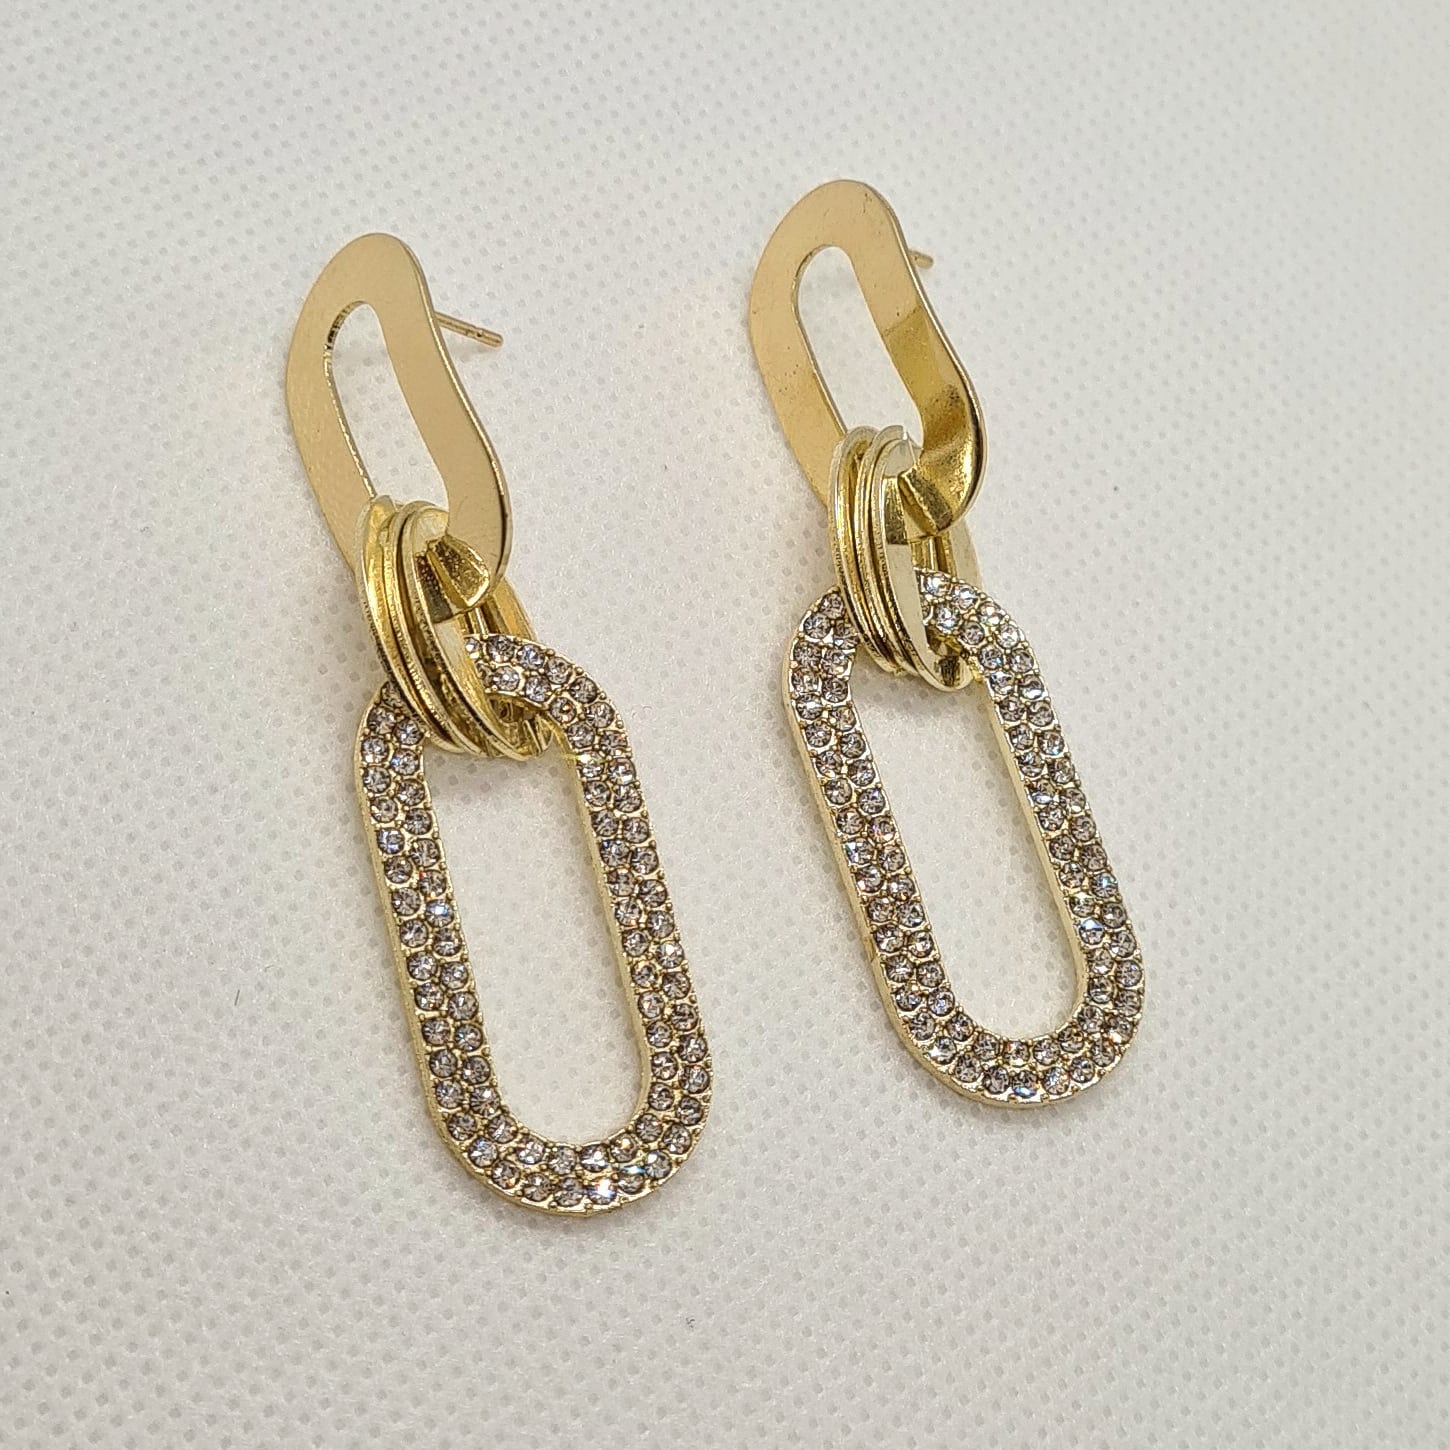 A pair of gold earrings with rhinestones on a white background. The earrings are teardrop-shaped with a gold border. The rhinestones are clear and round. The background is a white.